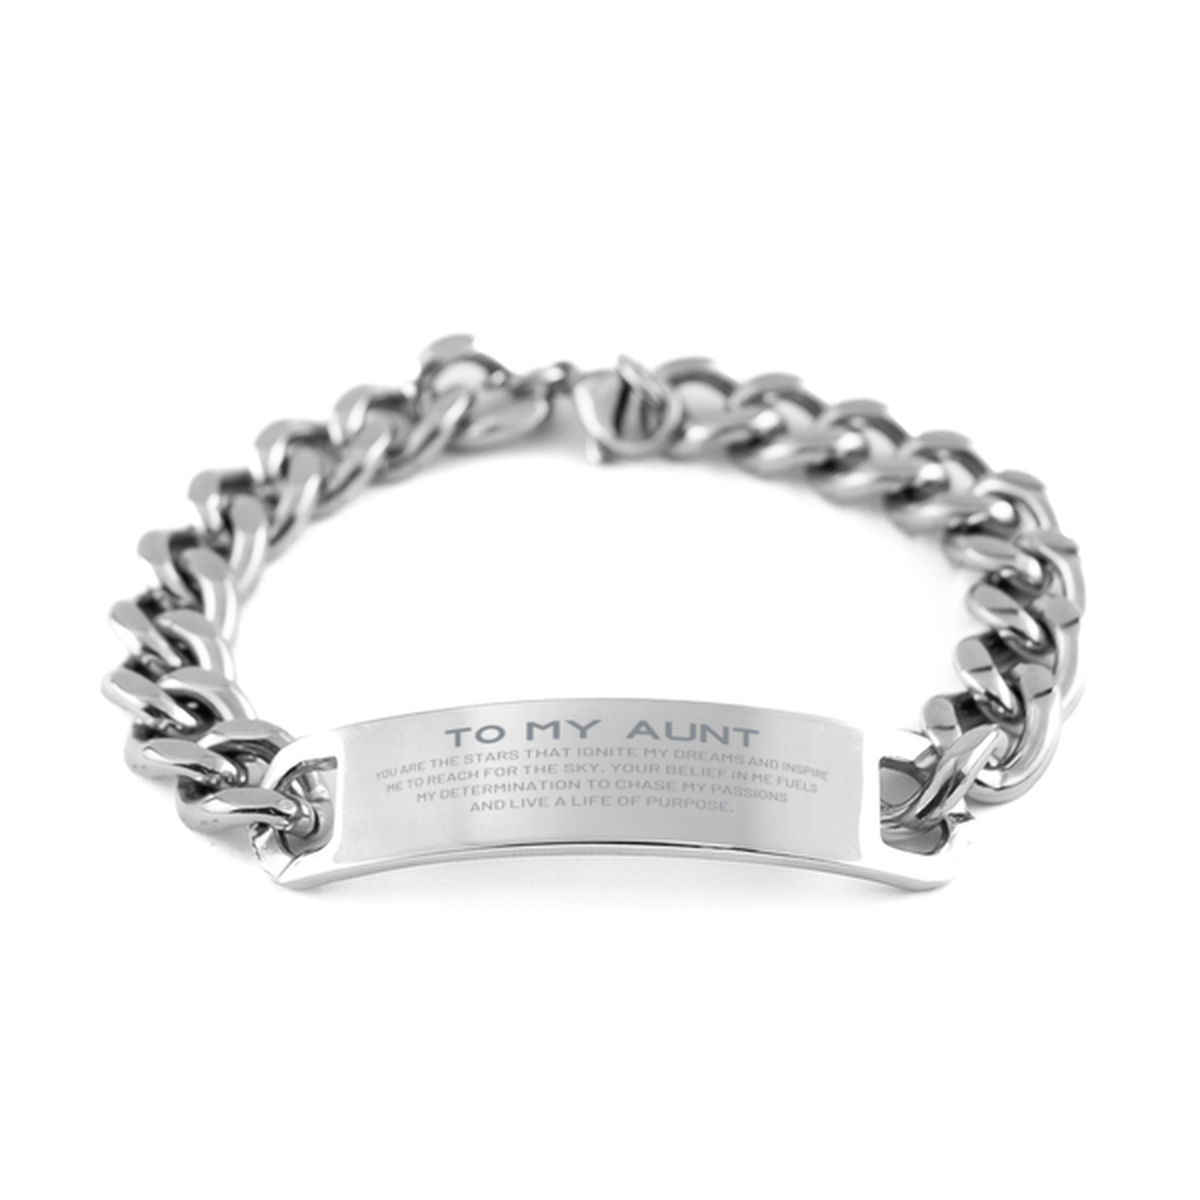 To My Aunt Cuban Chain Stainless Steel Bracelet, You are the stars that ignite my dreams and inspire me to reach for the sky, Birthday Unique Gifts For Aunt, Thank You Gifts For Aunt